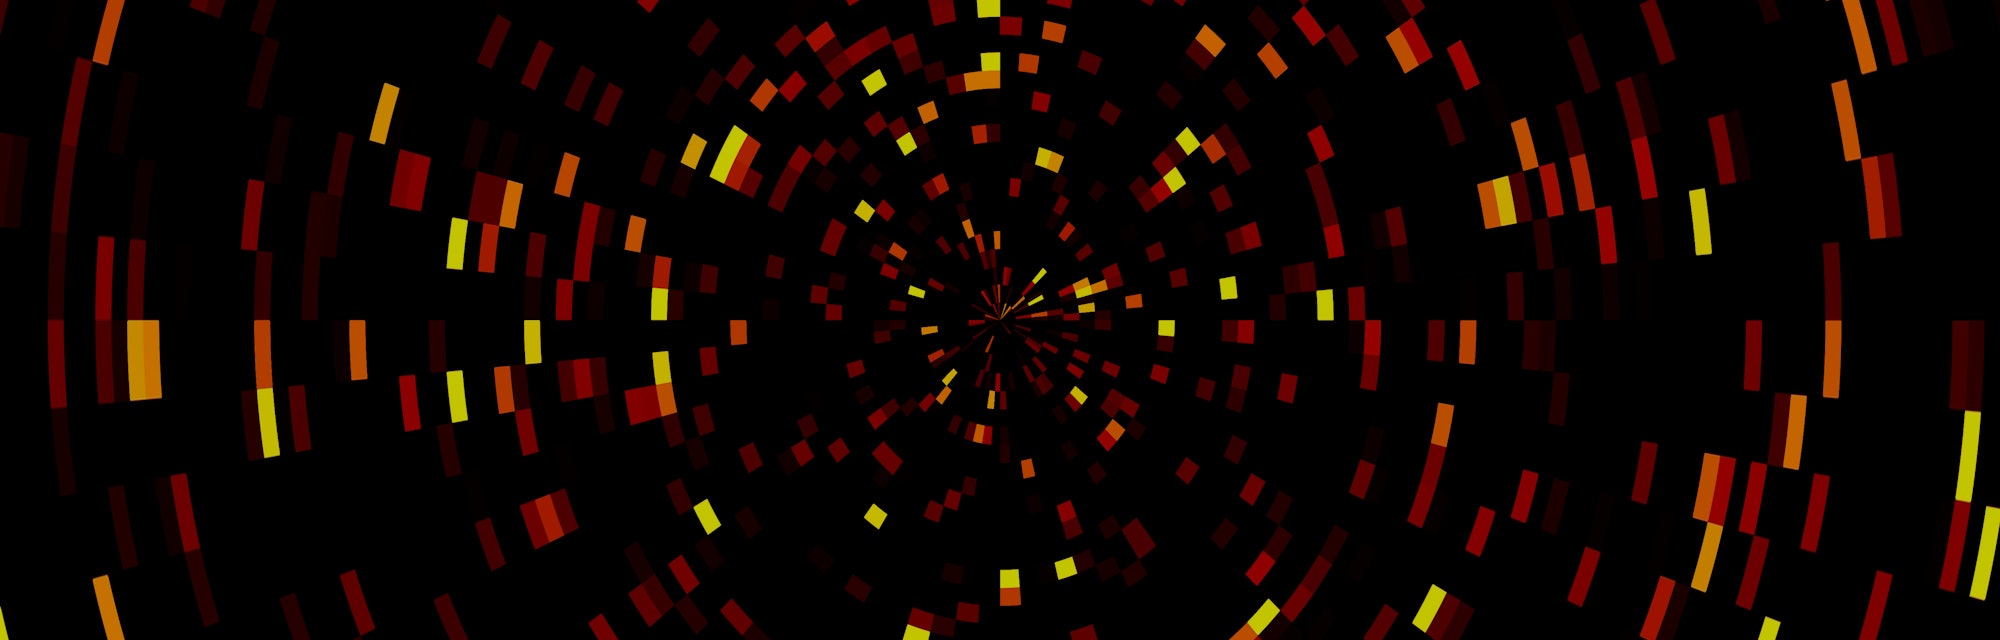 Lots of red and yellow rectangles arranged in circles shaping a vortex over black background